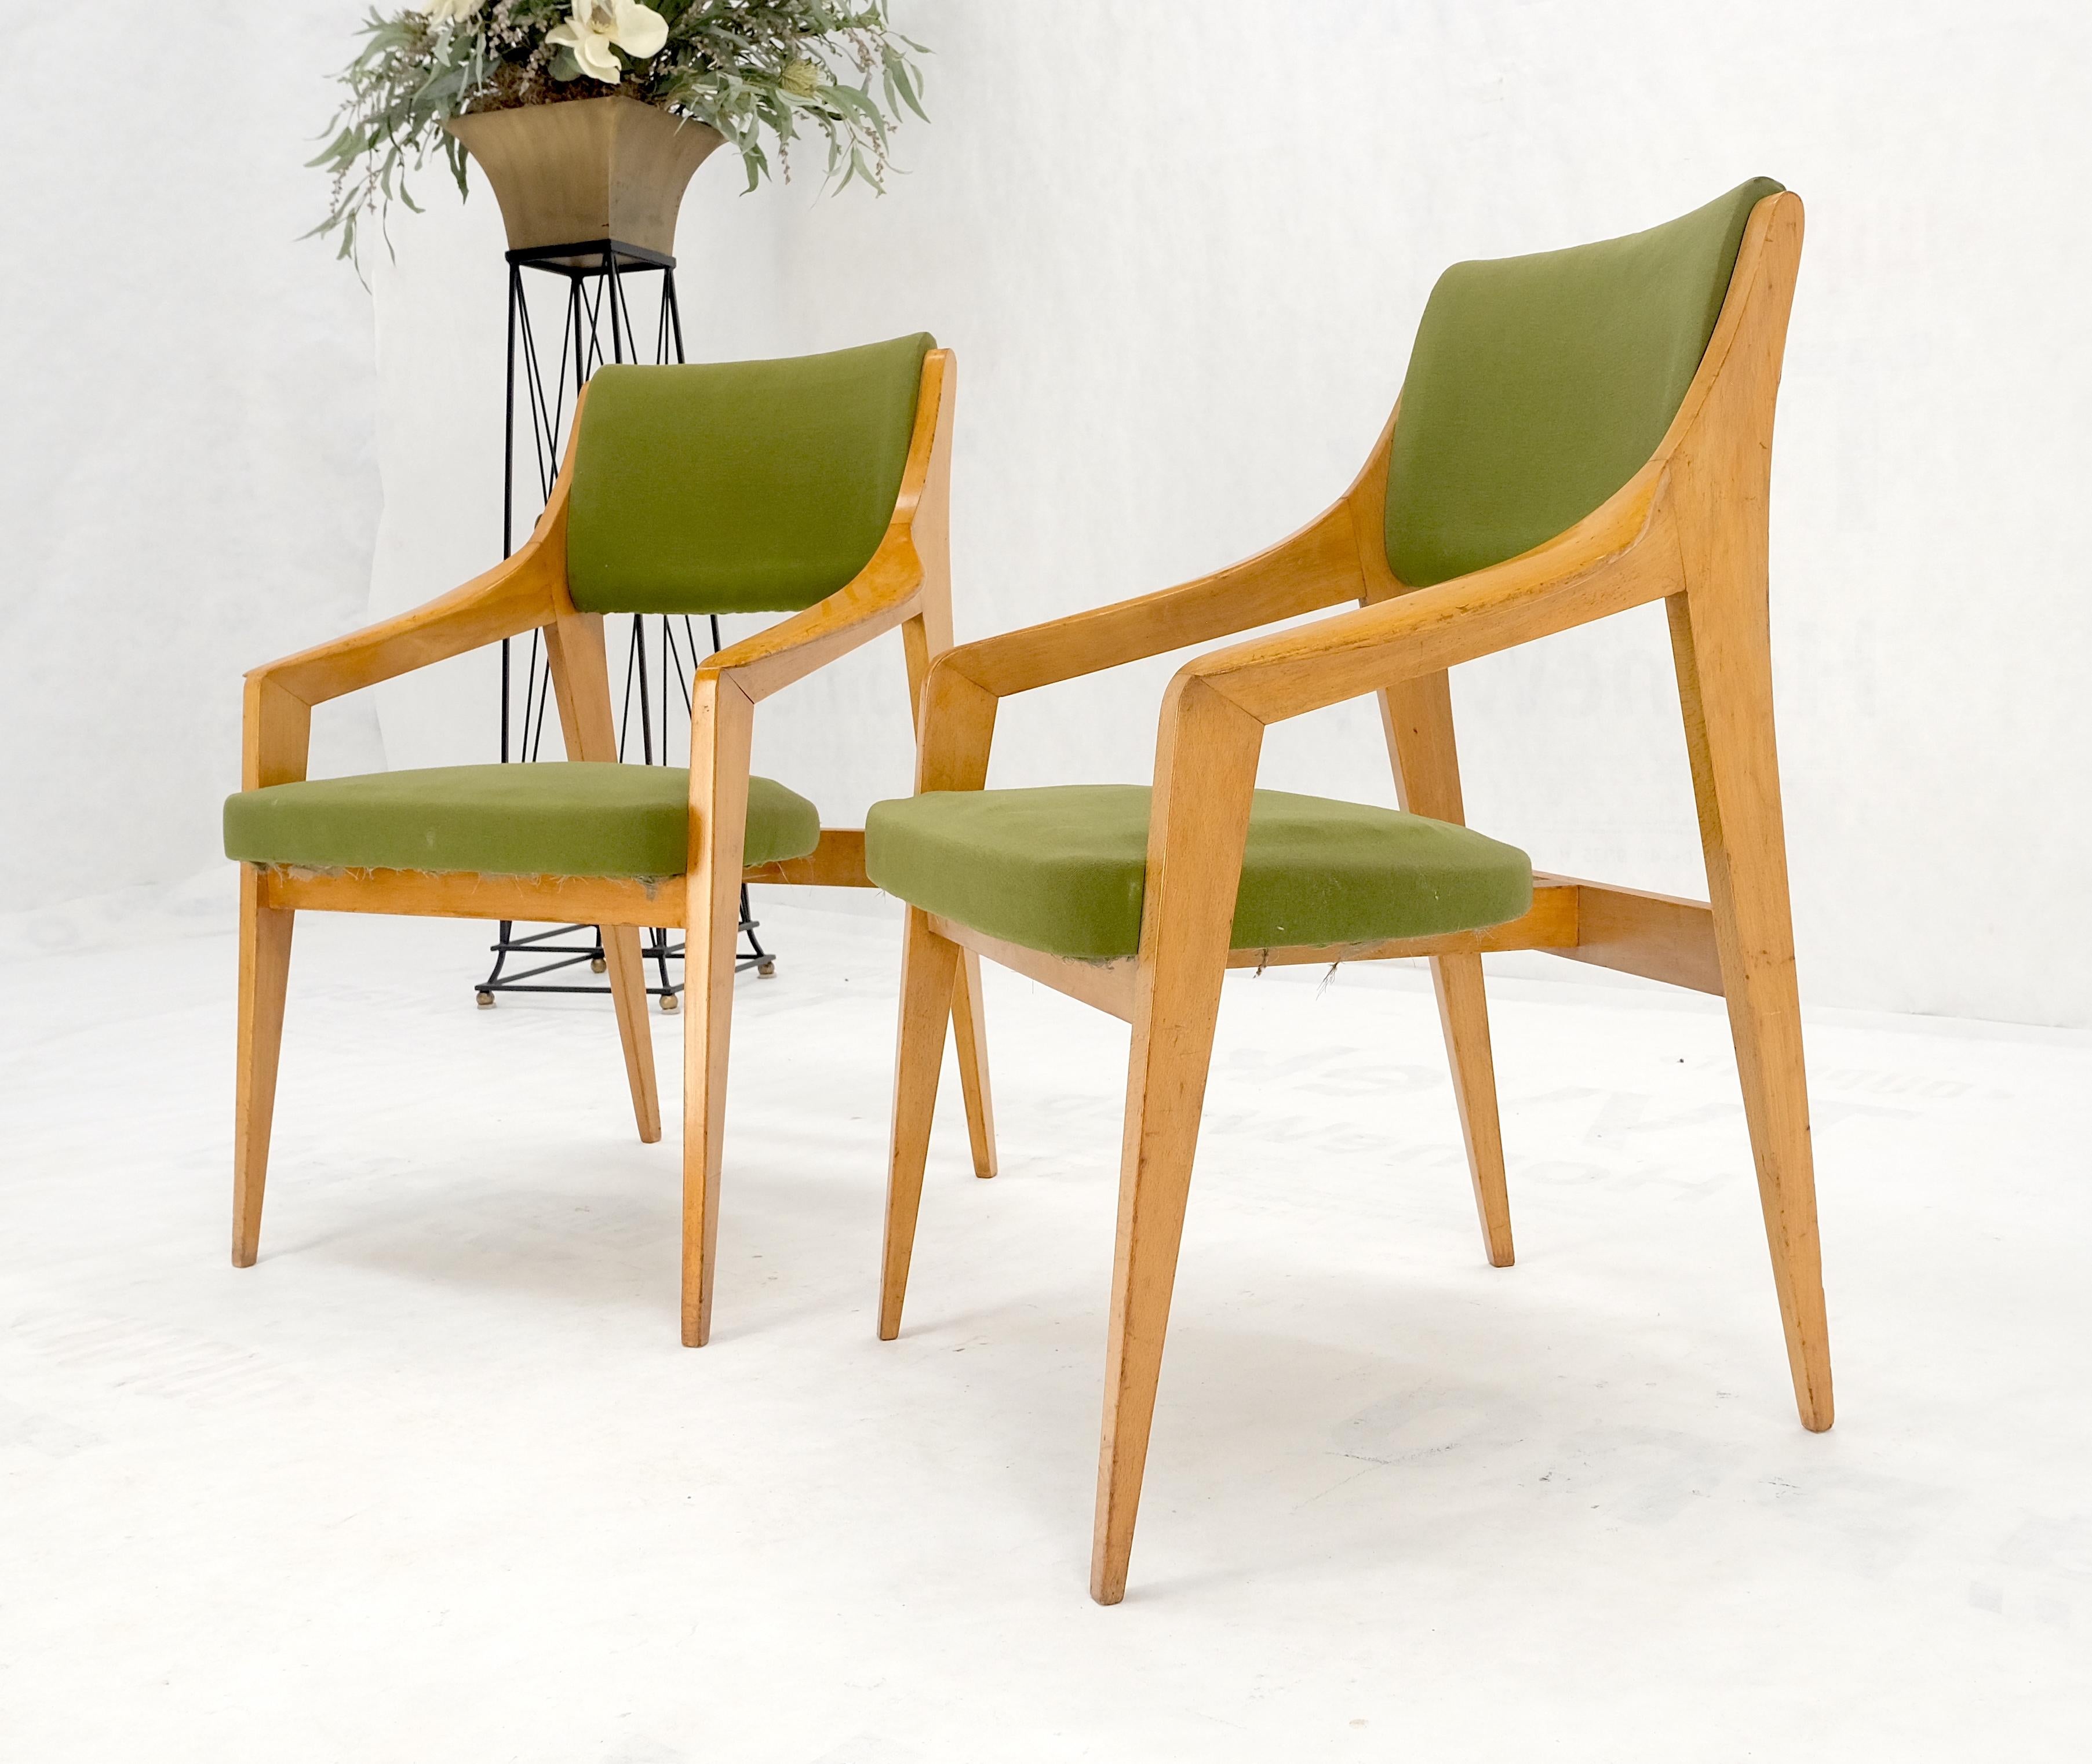 Pair of c1950s Blond Birch Scandinavian Swedish Arm Chairs Green Upholstery For Sale 8